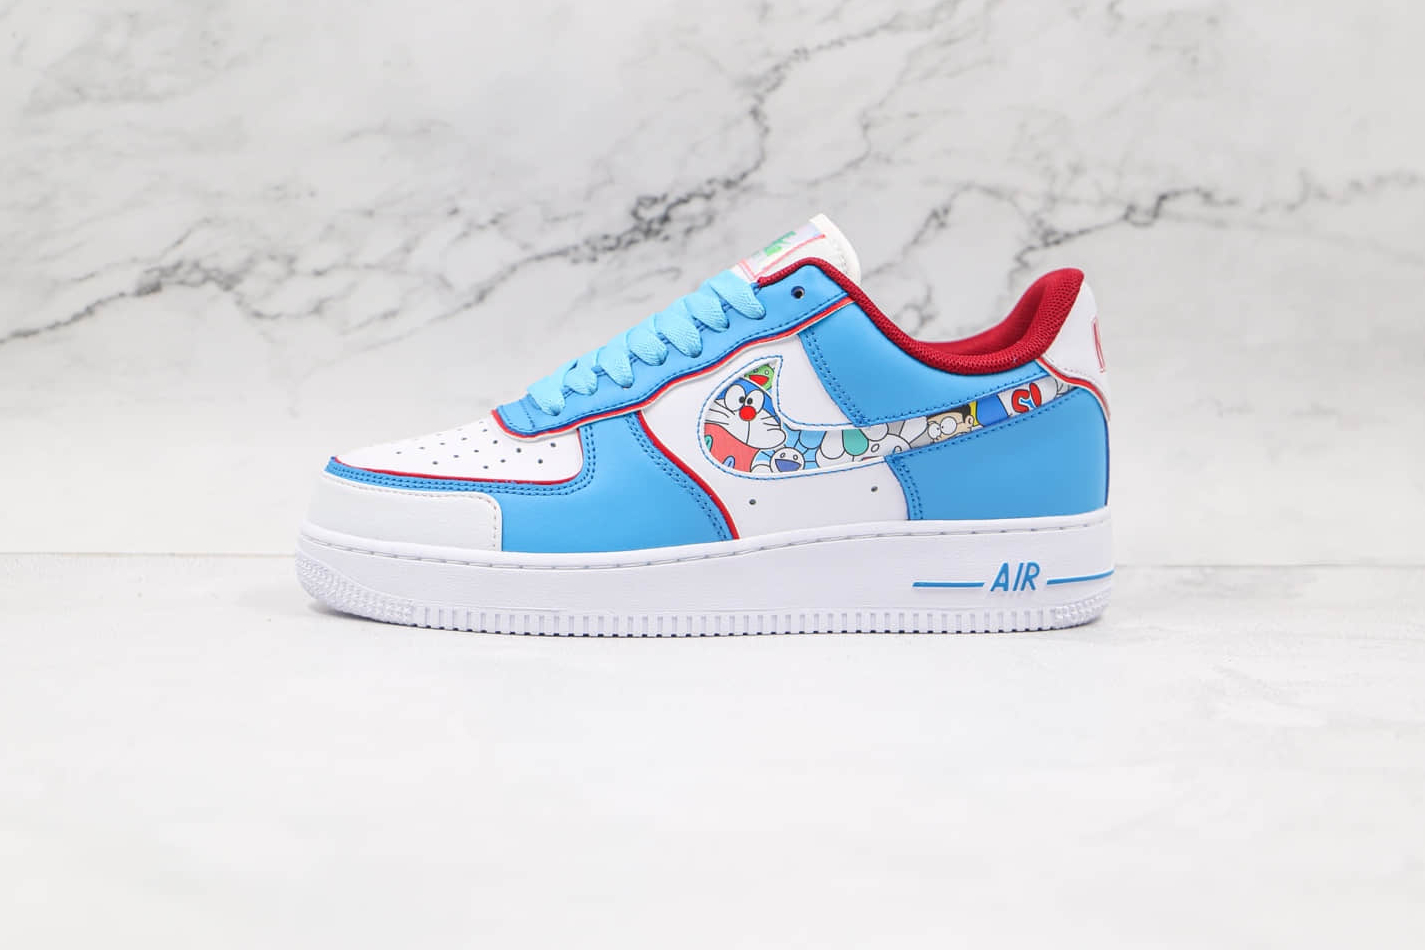 Nike Air Force 1 07 Low x Doraemon Blue White Red BQ8988-106 - Limited Edition Sneakers